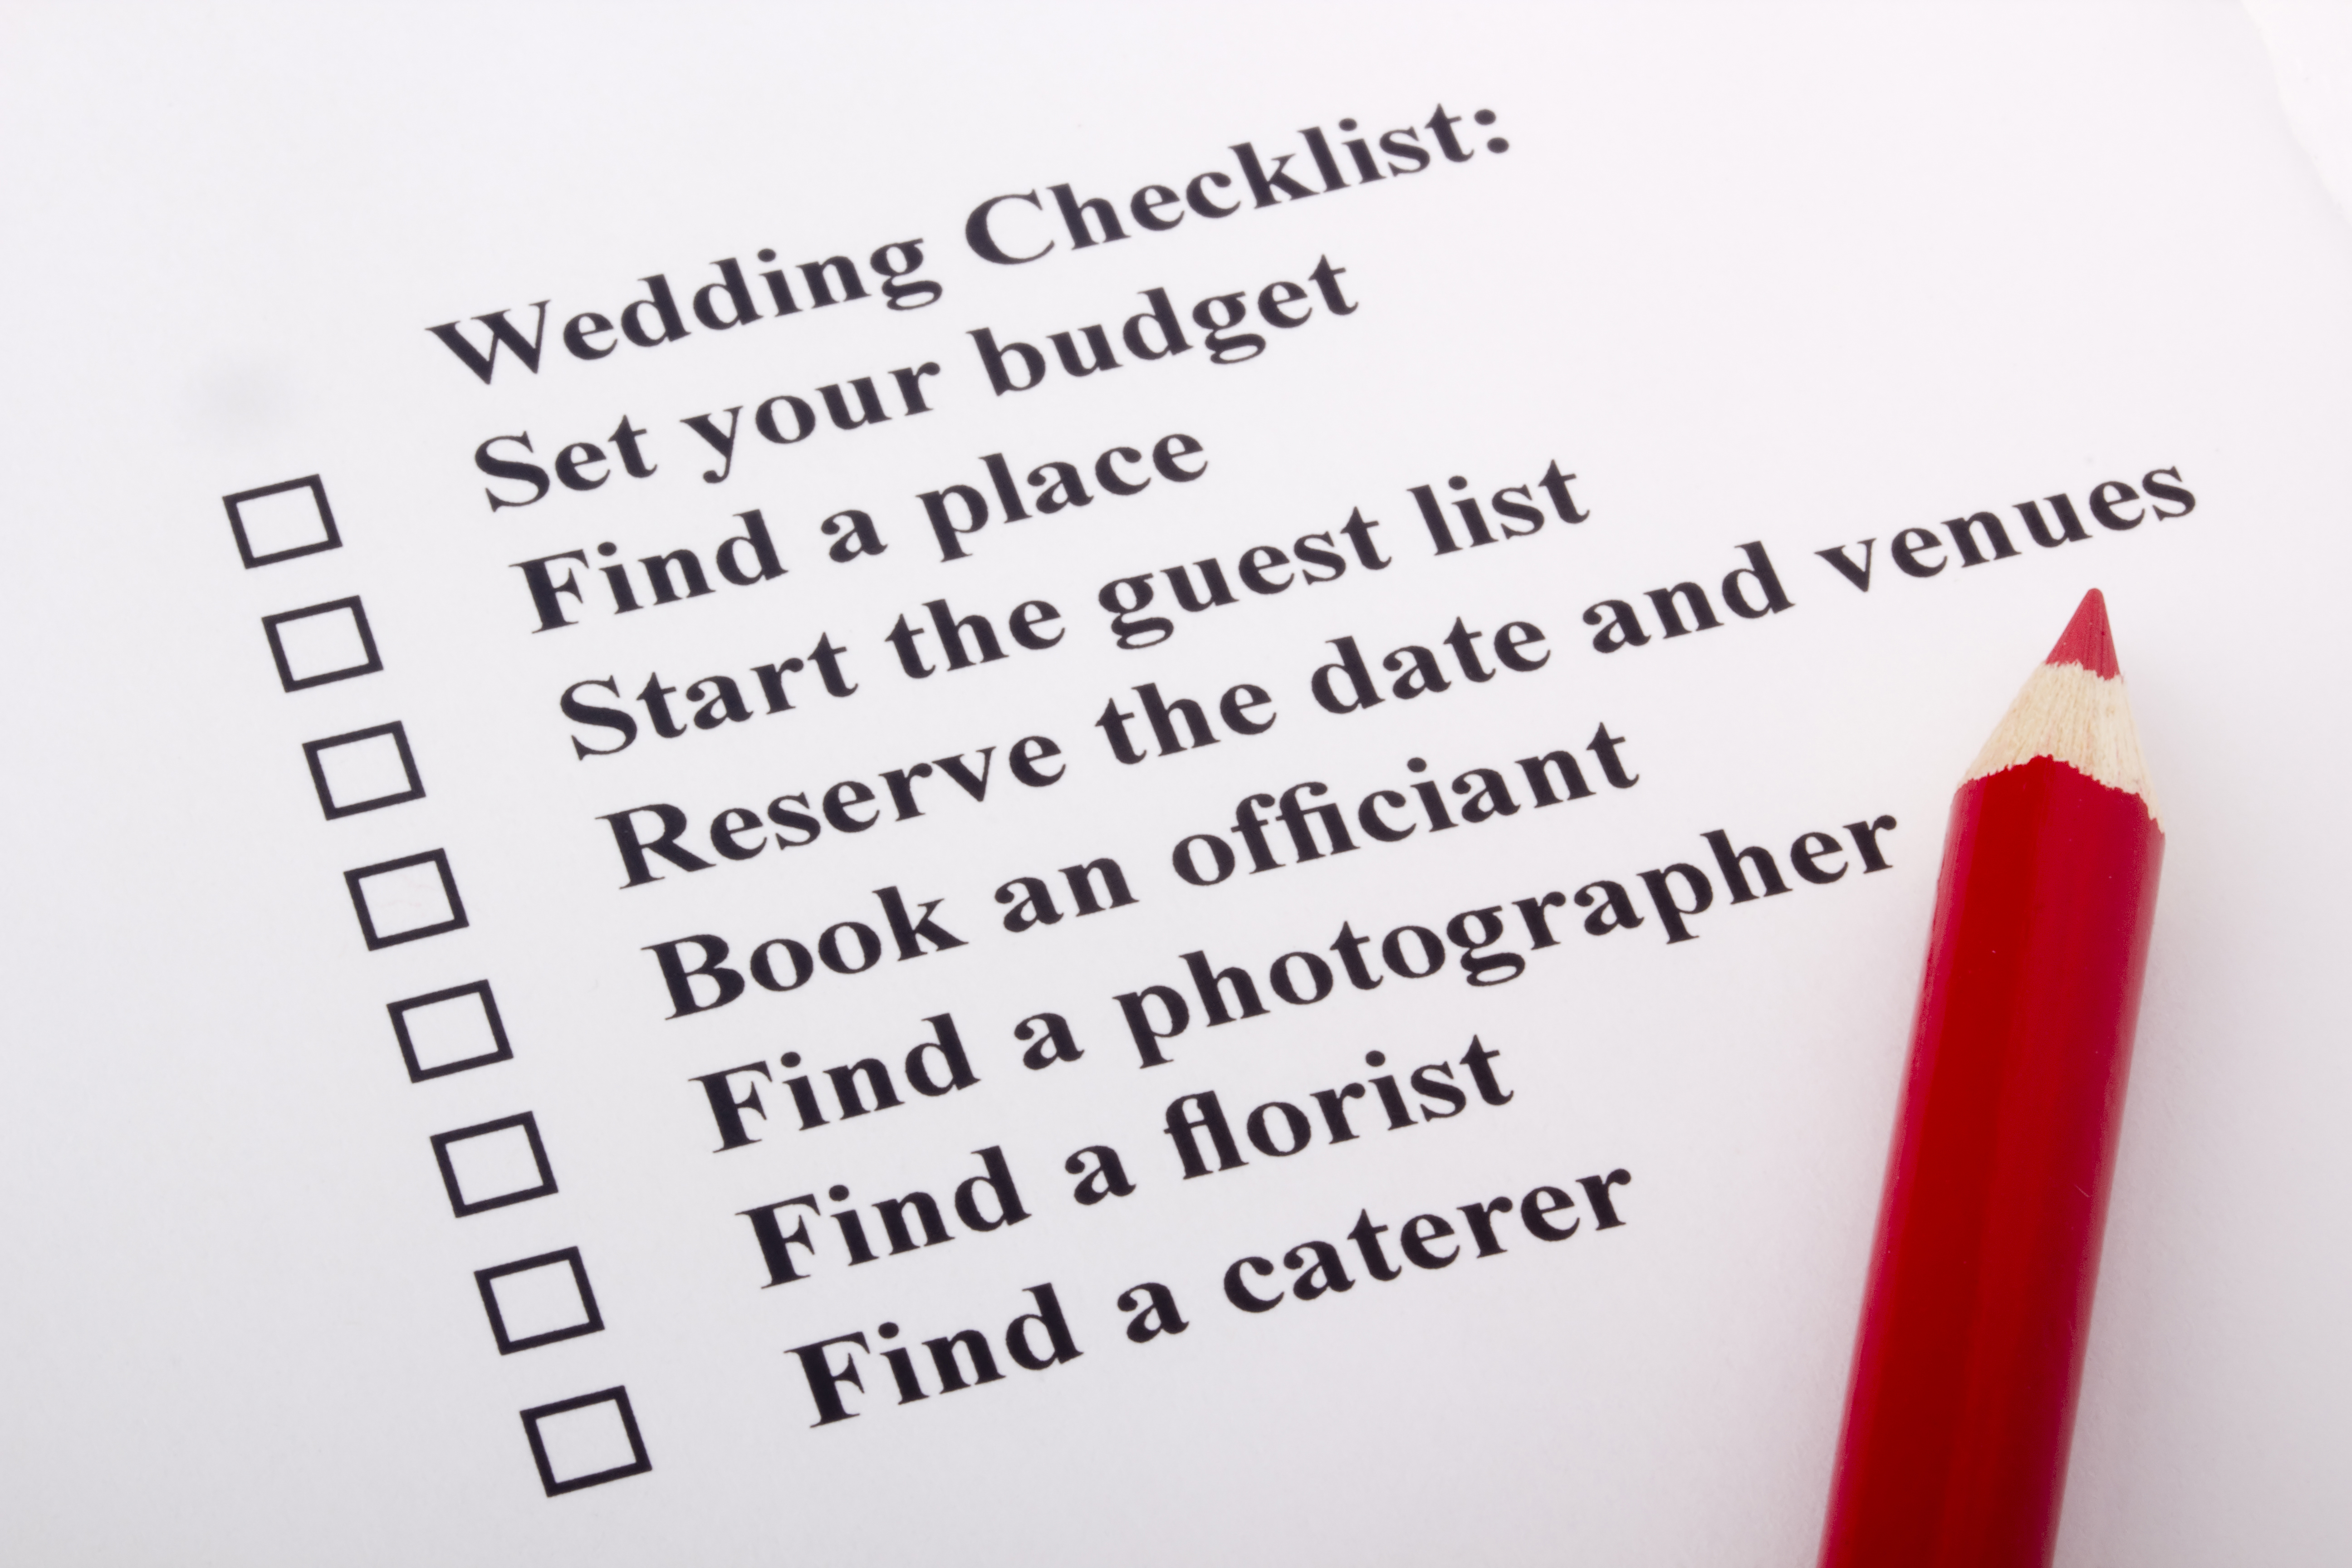 Red pencil laying on a wedding checklist